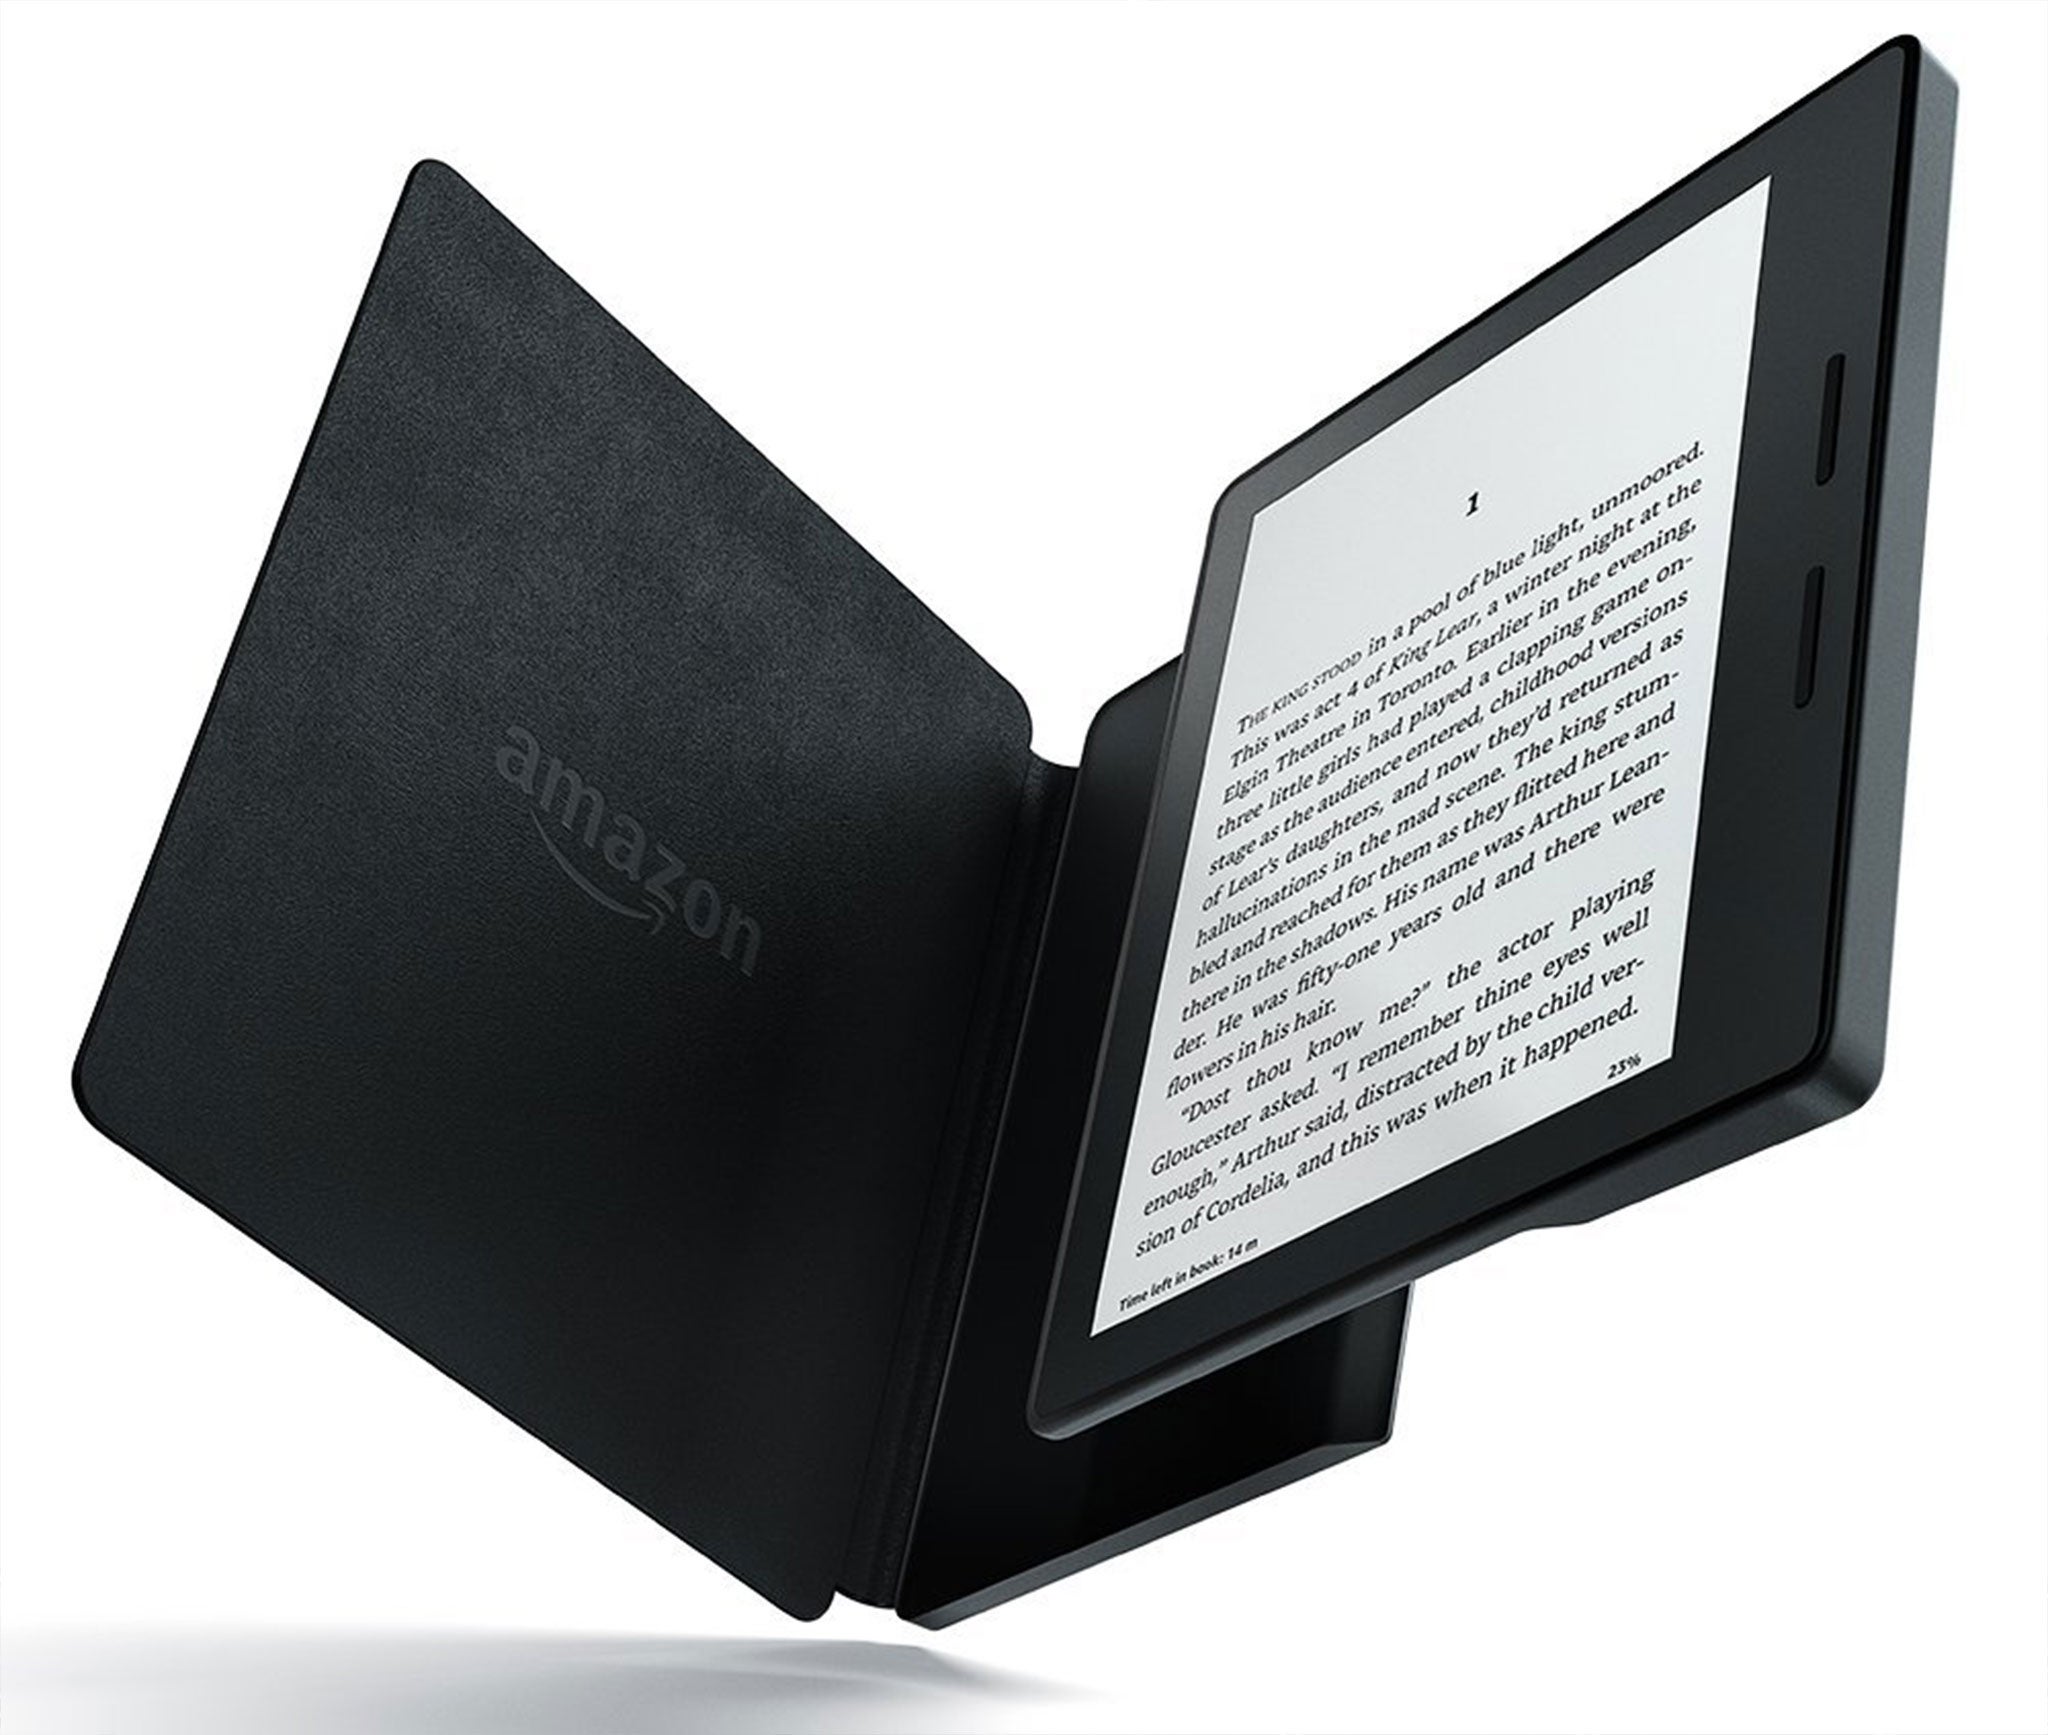 The new Kindle is a pretty impressive device